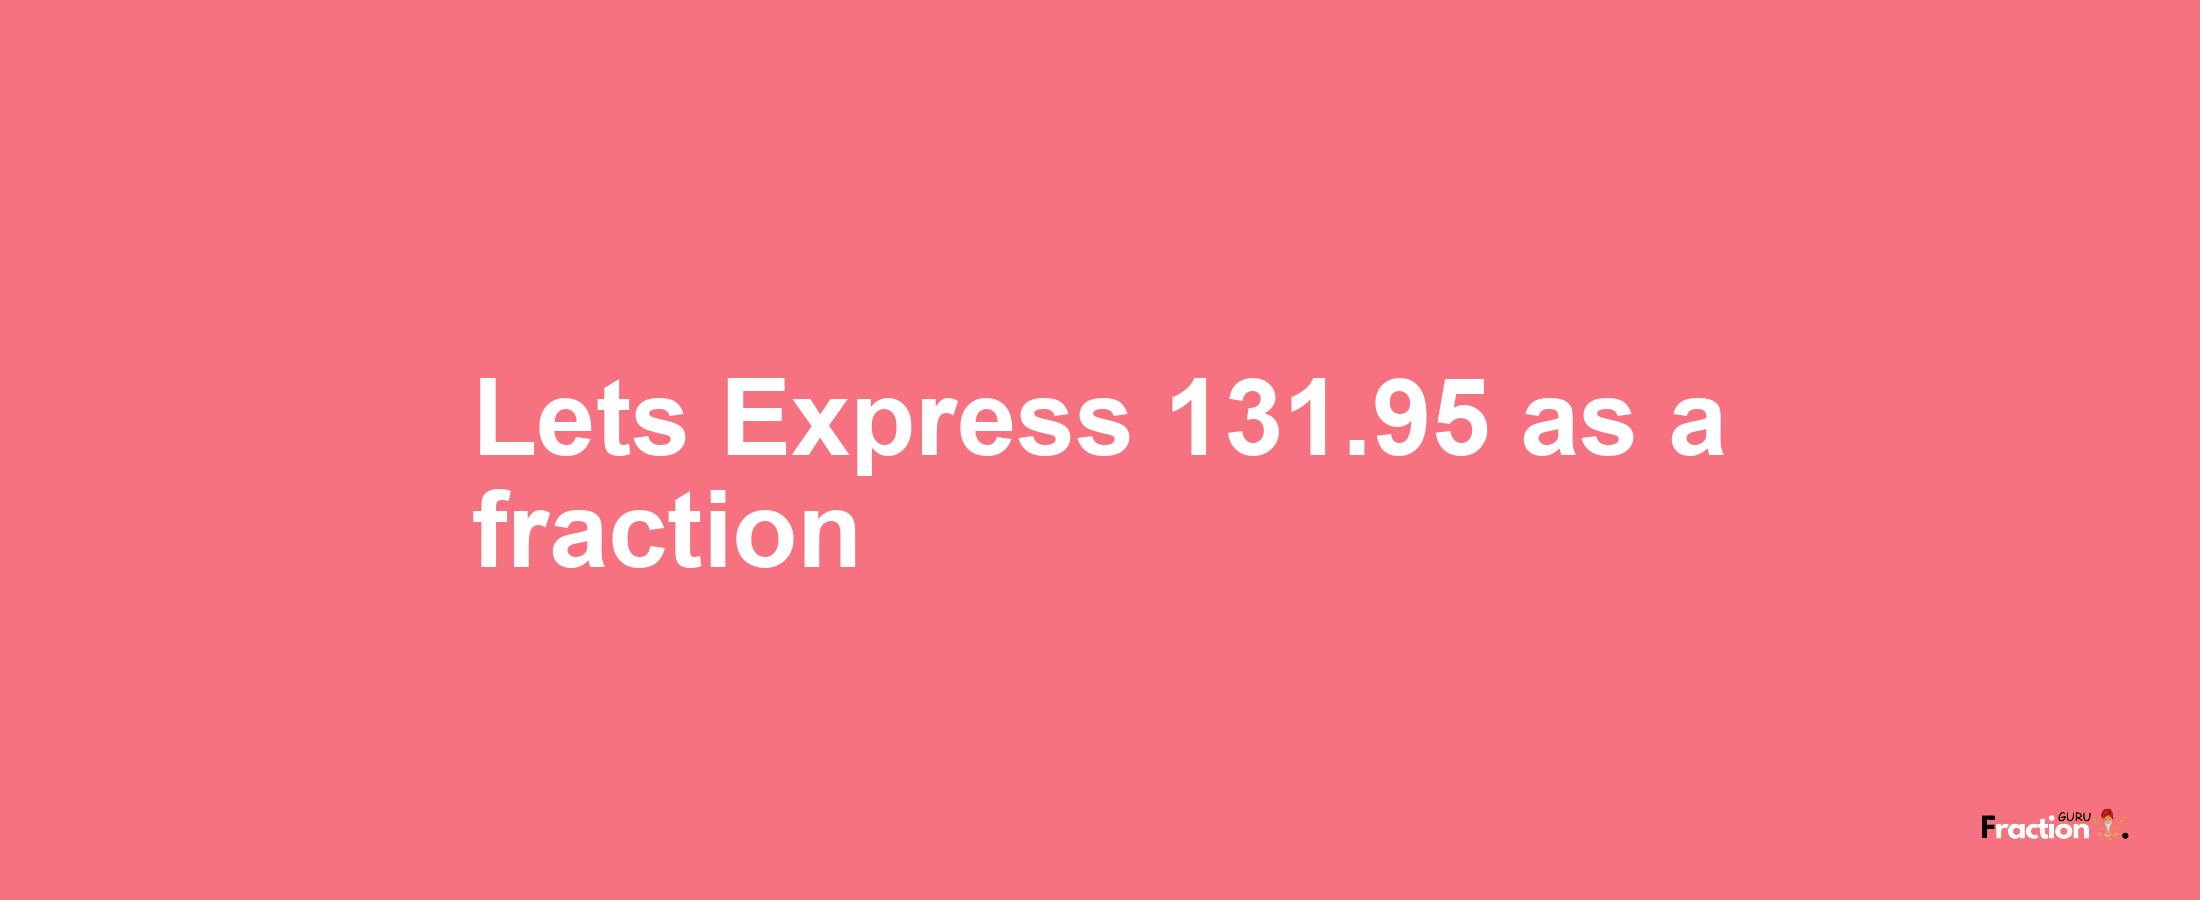 Lets Express 131.95 as afraction